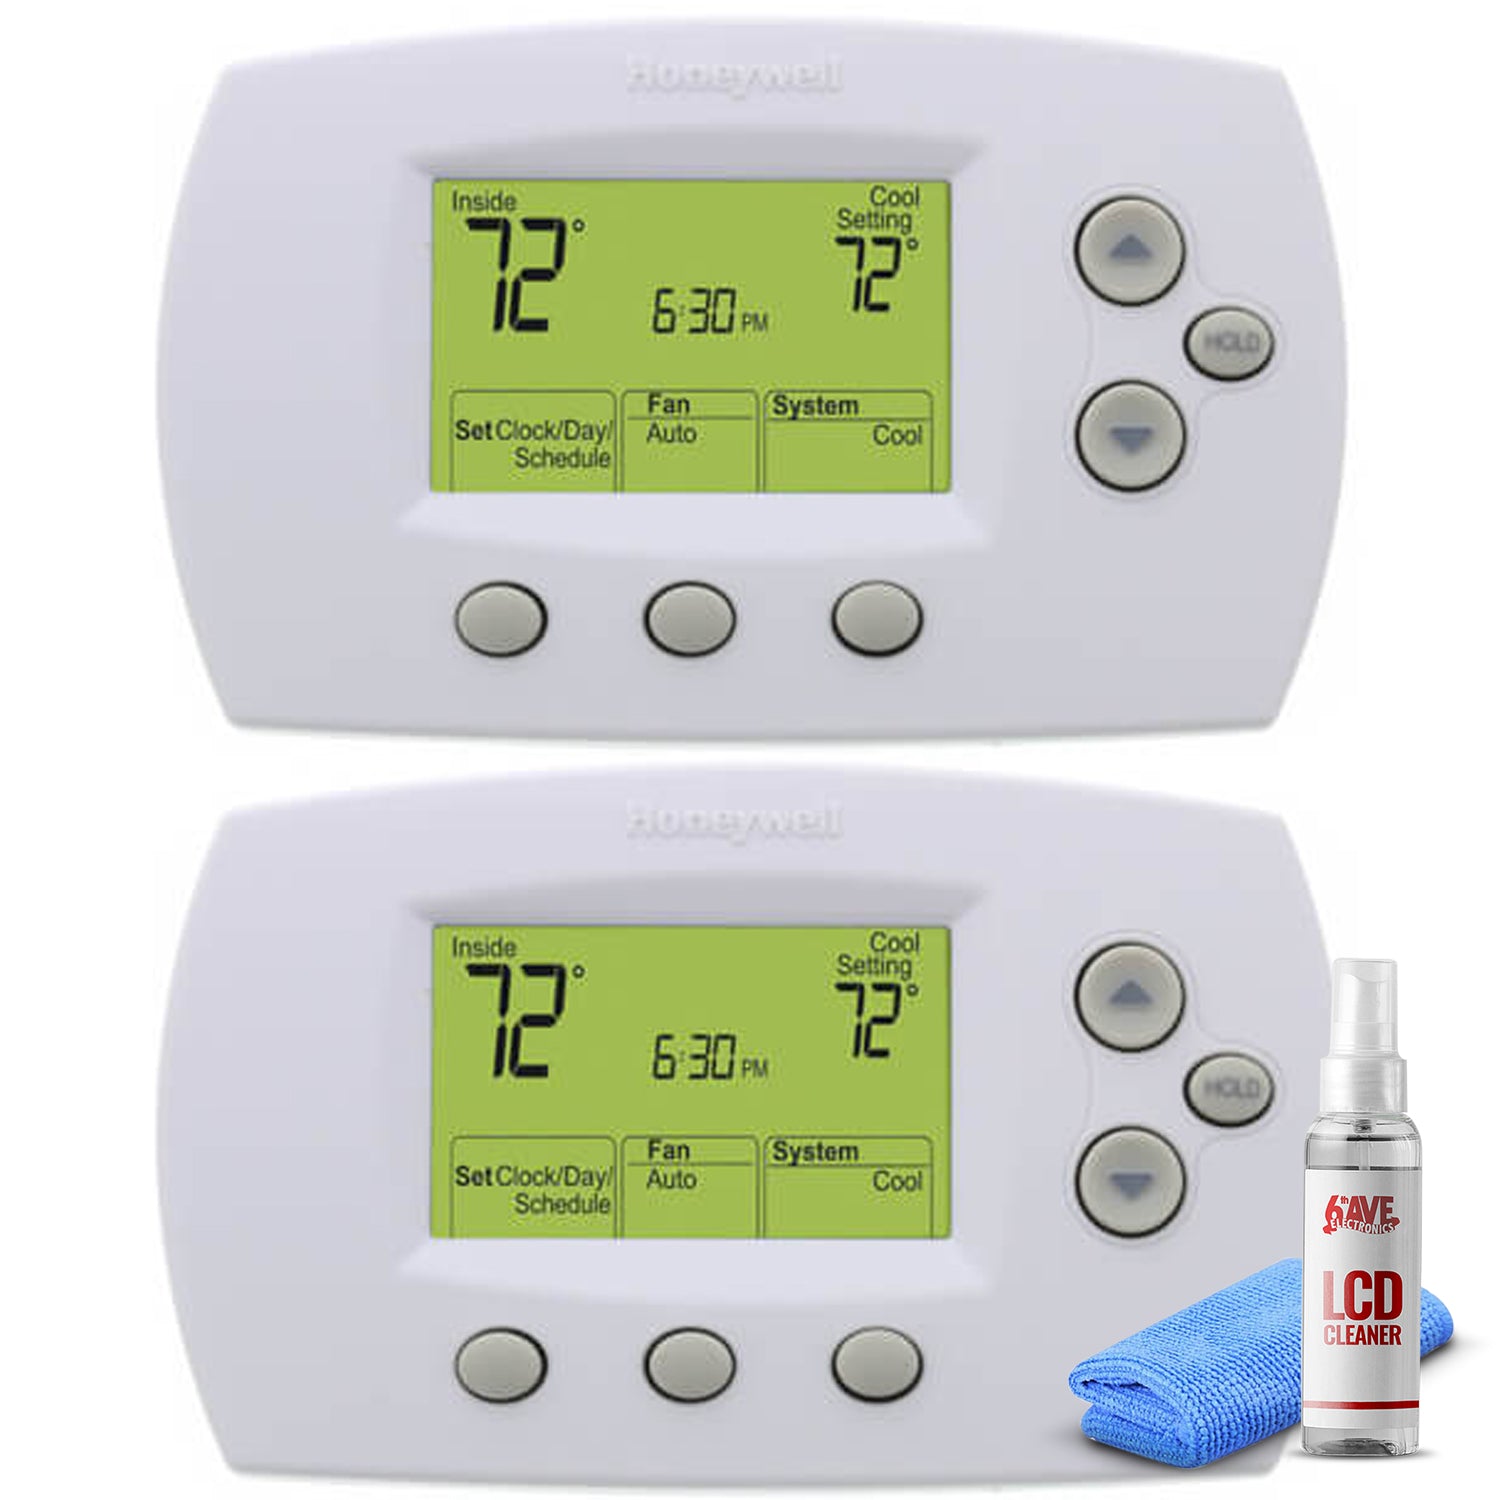 2-Pack Honeywell TH6220 FocusPro 6000 5-1-1 Programmable Heat Pump Thermostat